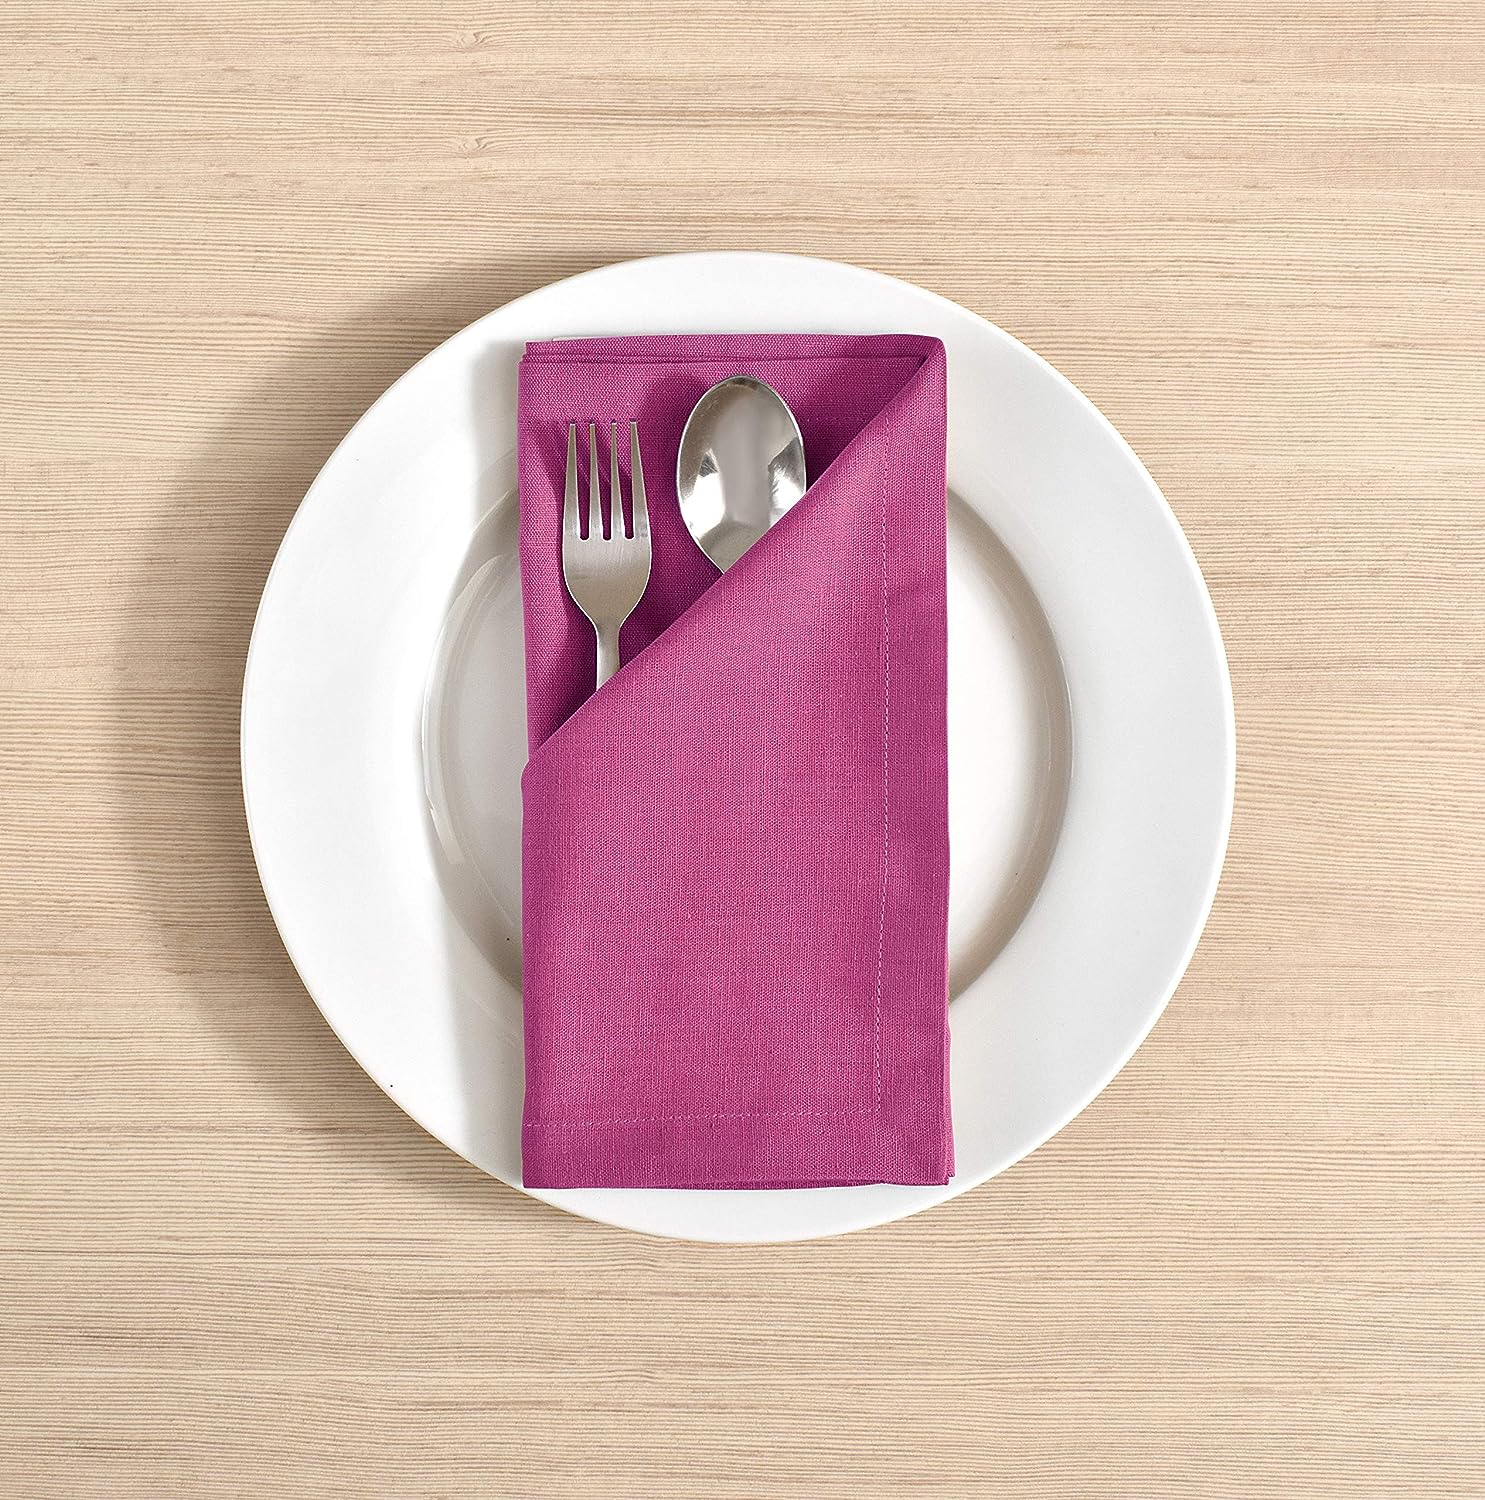 FINGERCRAFT Dinner Cloth Napkins, Cotton Linen Blend Fabric 12 Pack Easter Special, Premium Quality, Mitered Corners for Every Day Use Napkins are Pre Shrunk and Good Absorbency Magenta 1